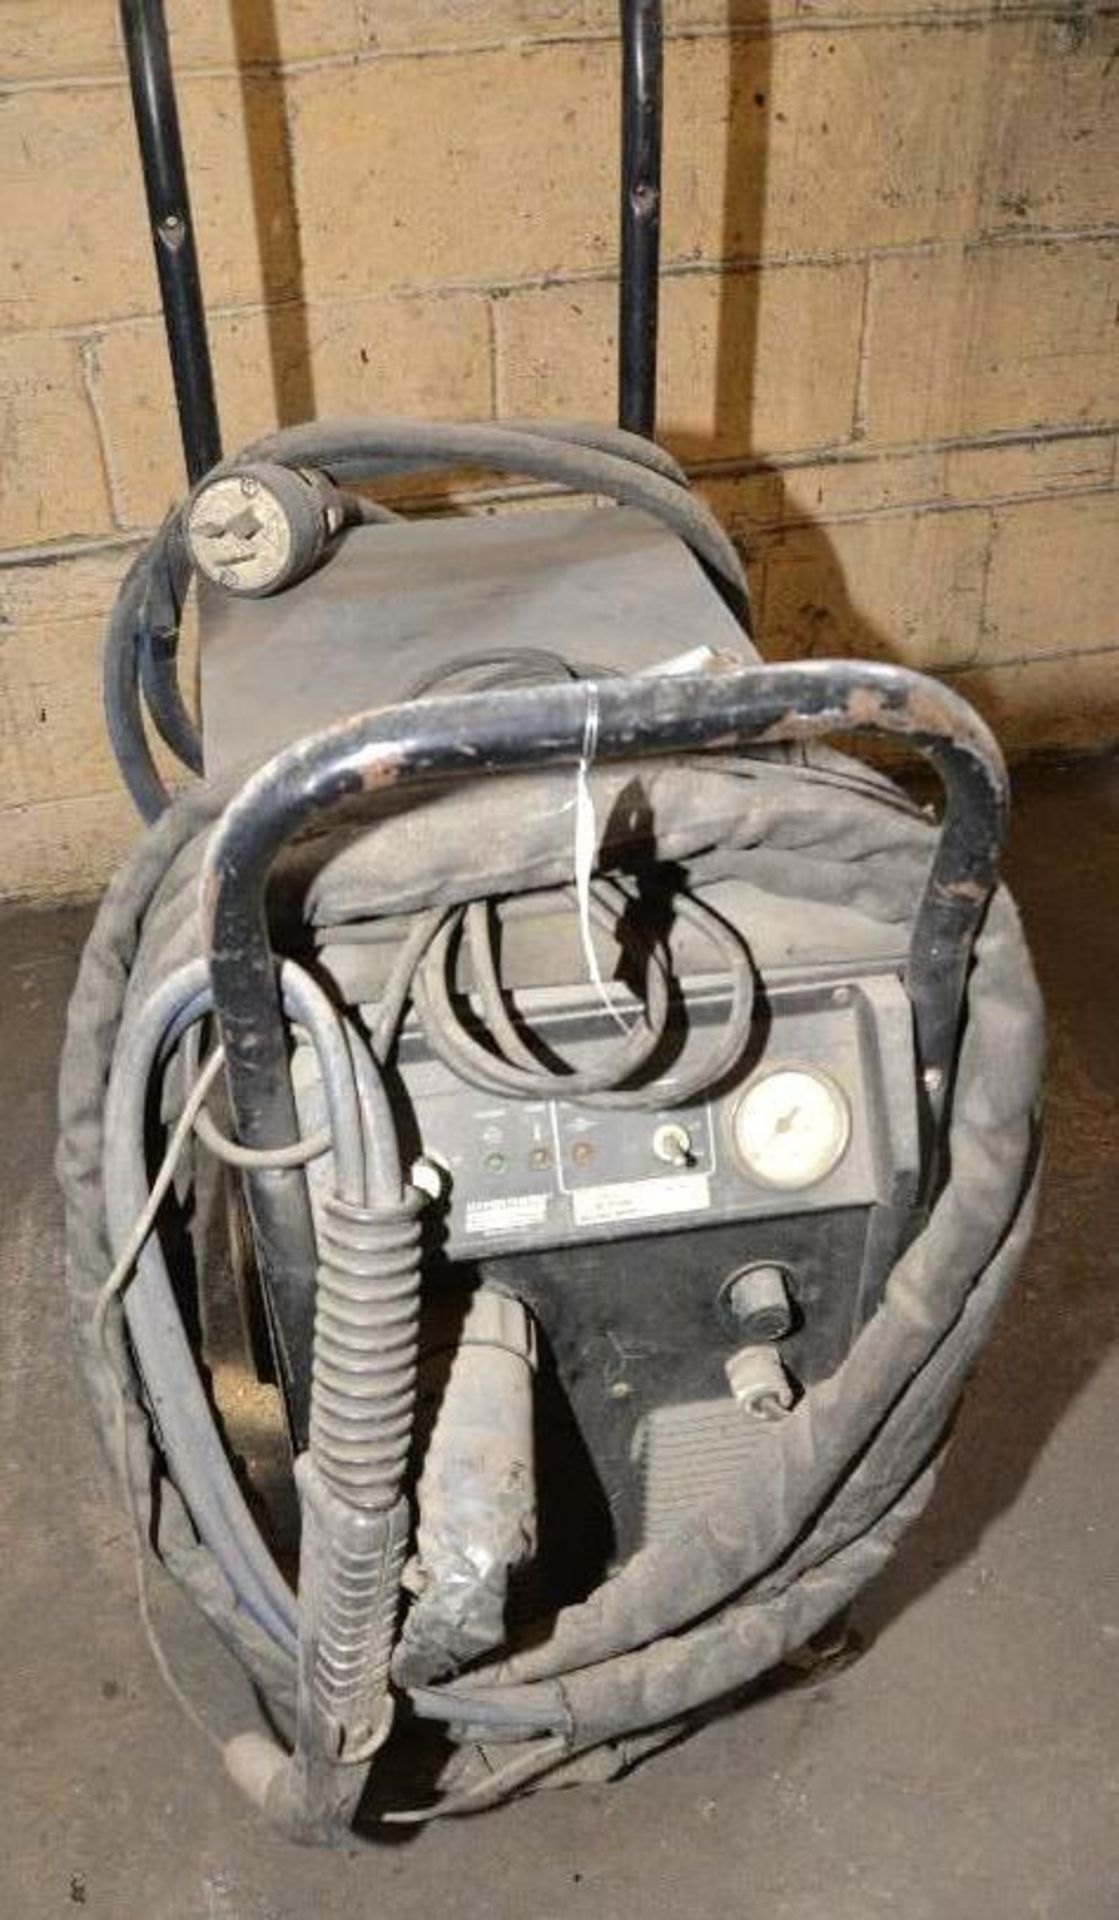 HYPERTHERN MAX 70 WELDING MACHINE HAS LEADS & ELECTRICAL CORDS- CONDITION UNKNOWNIDAHO S/N: 84719